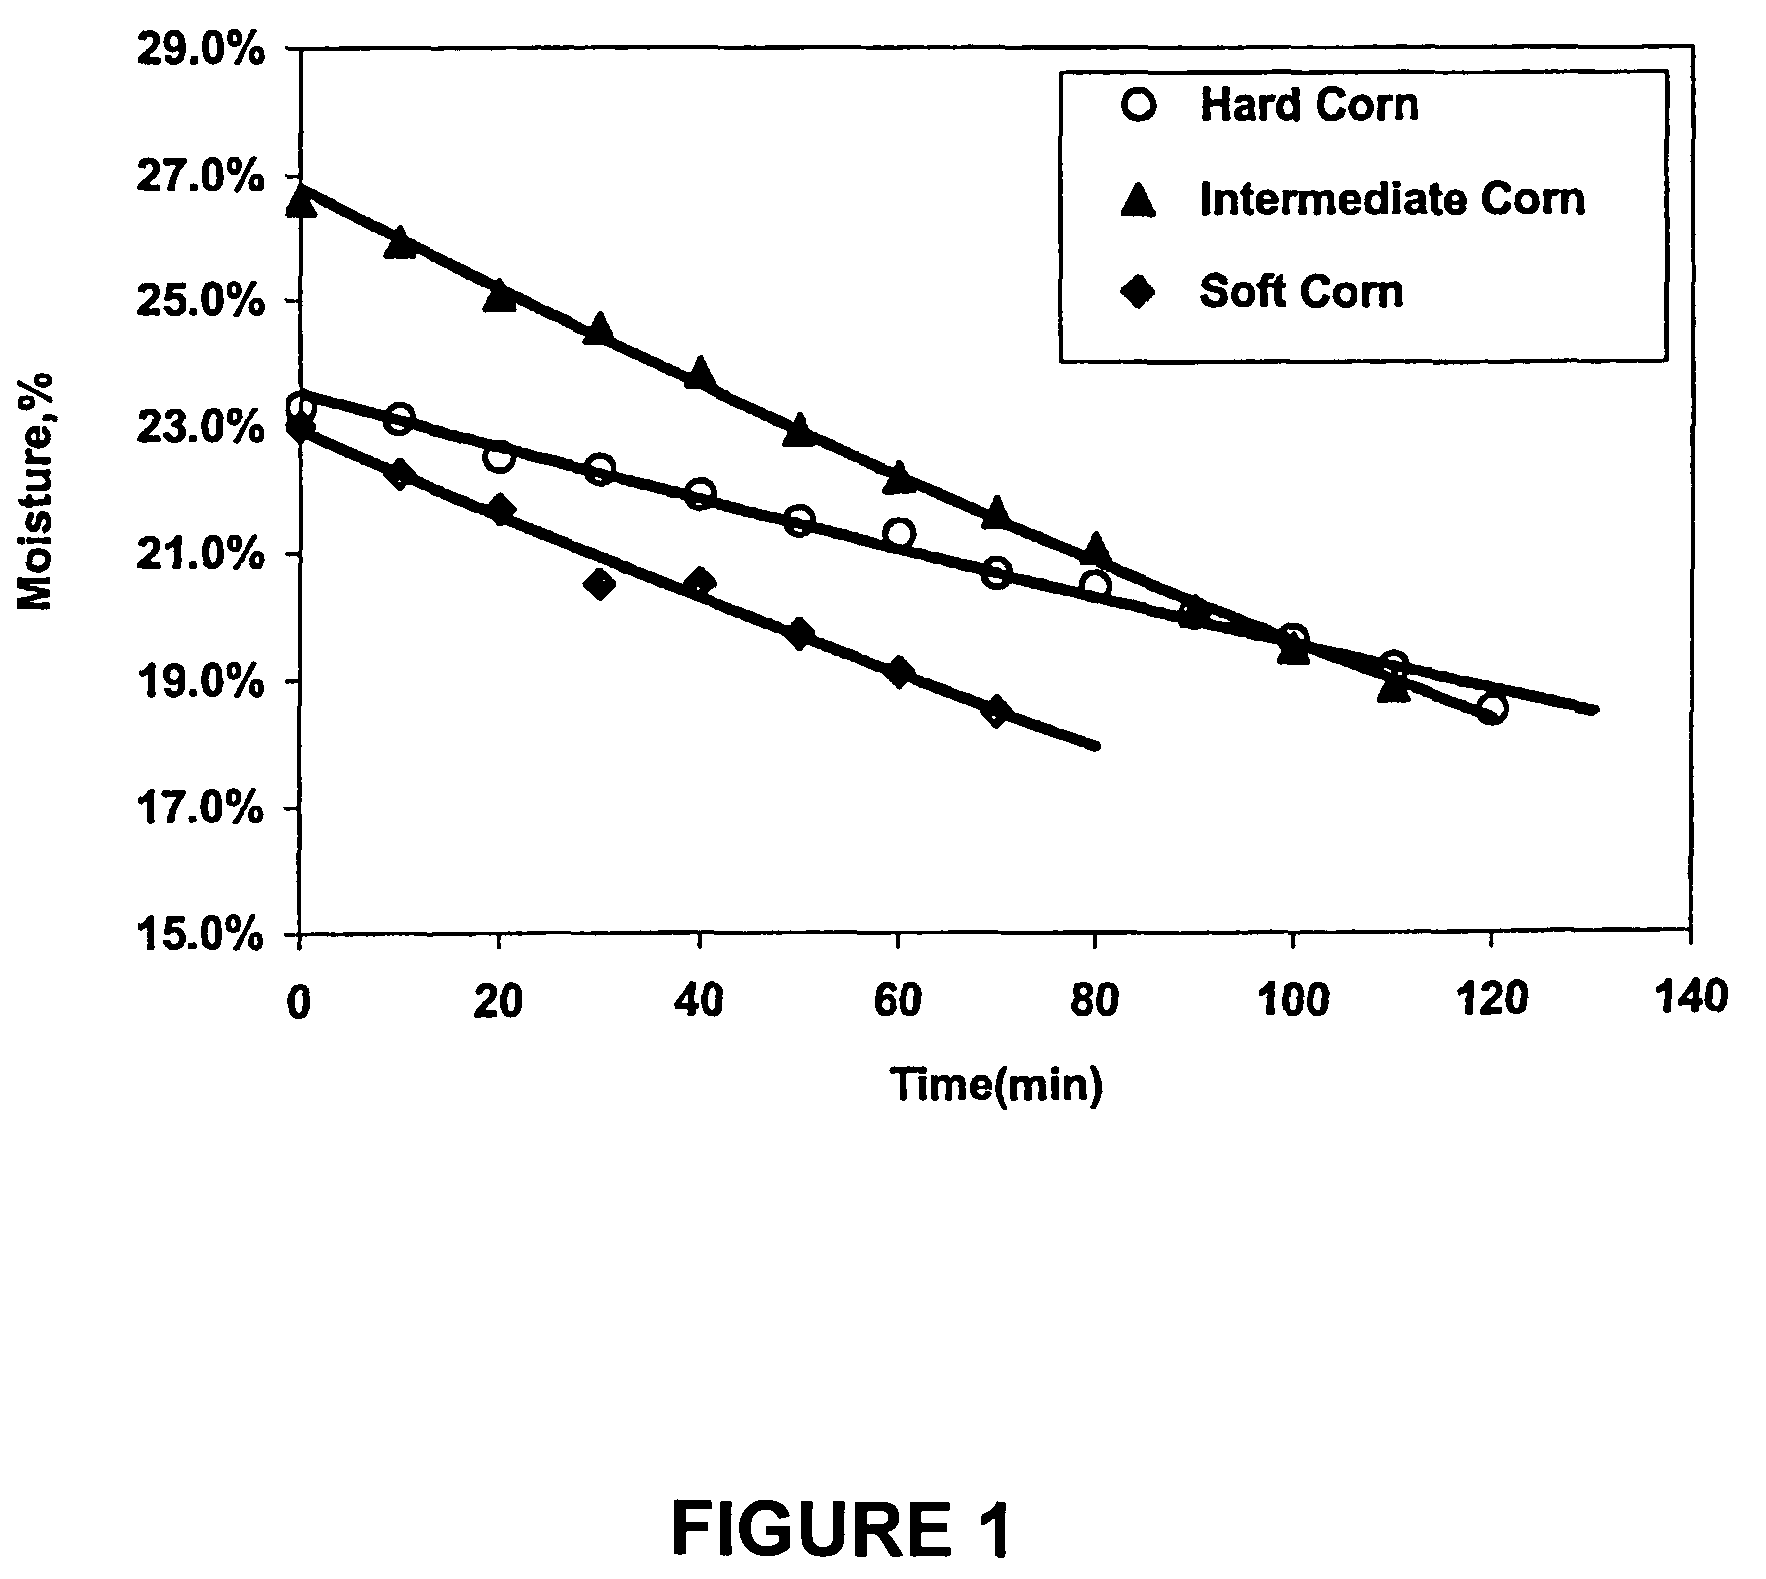 Methods and apparatus for treating plant products using electromagnetic fields